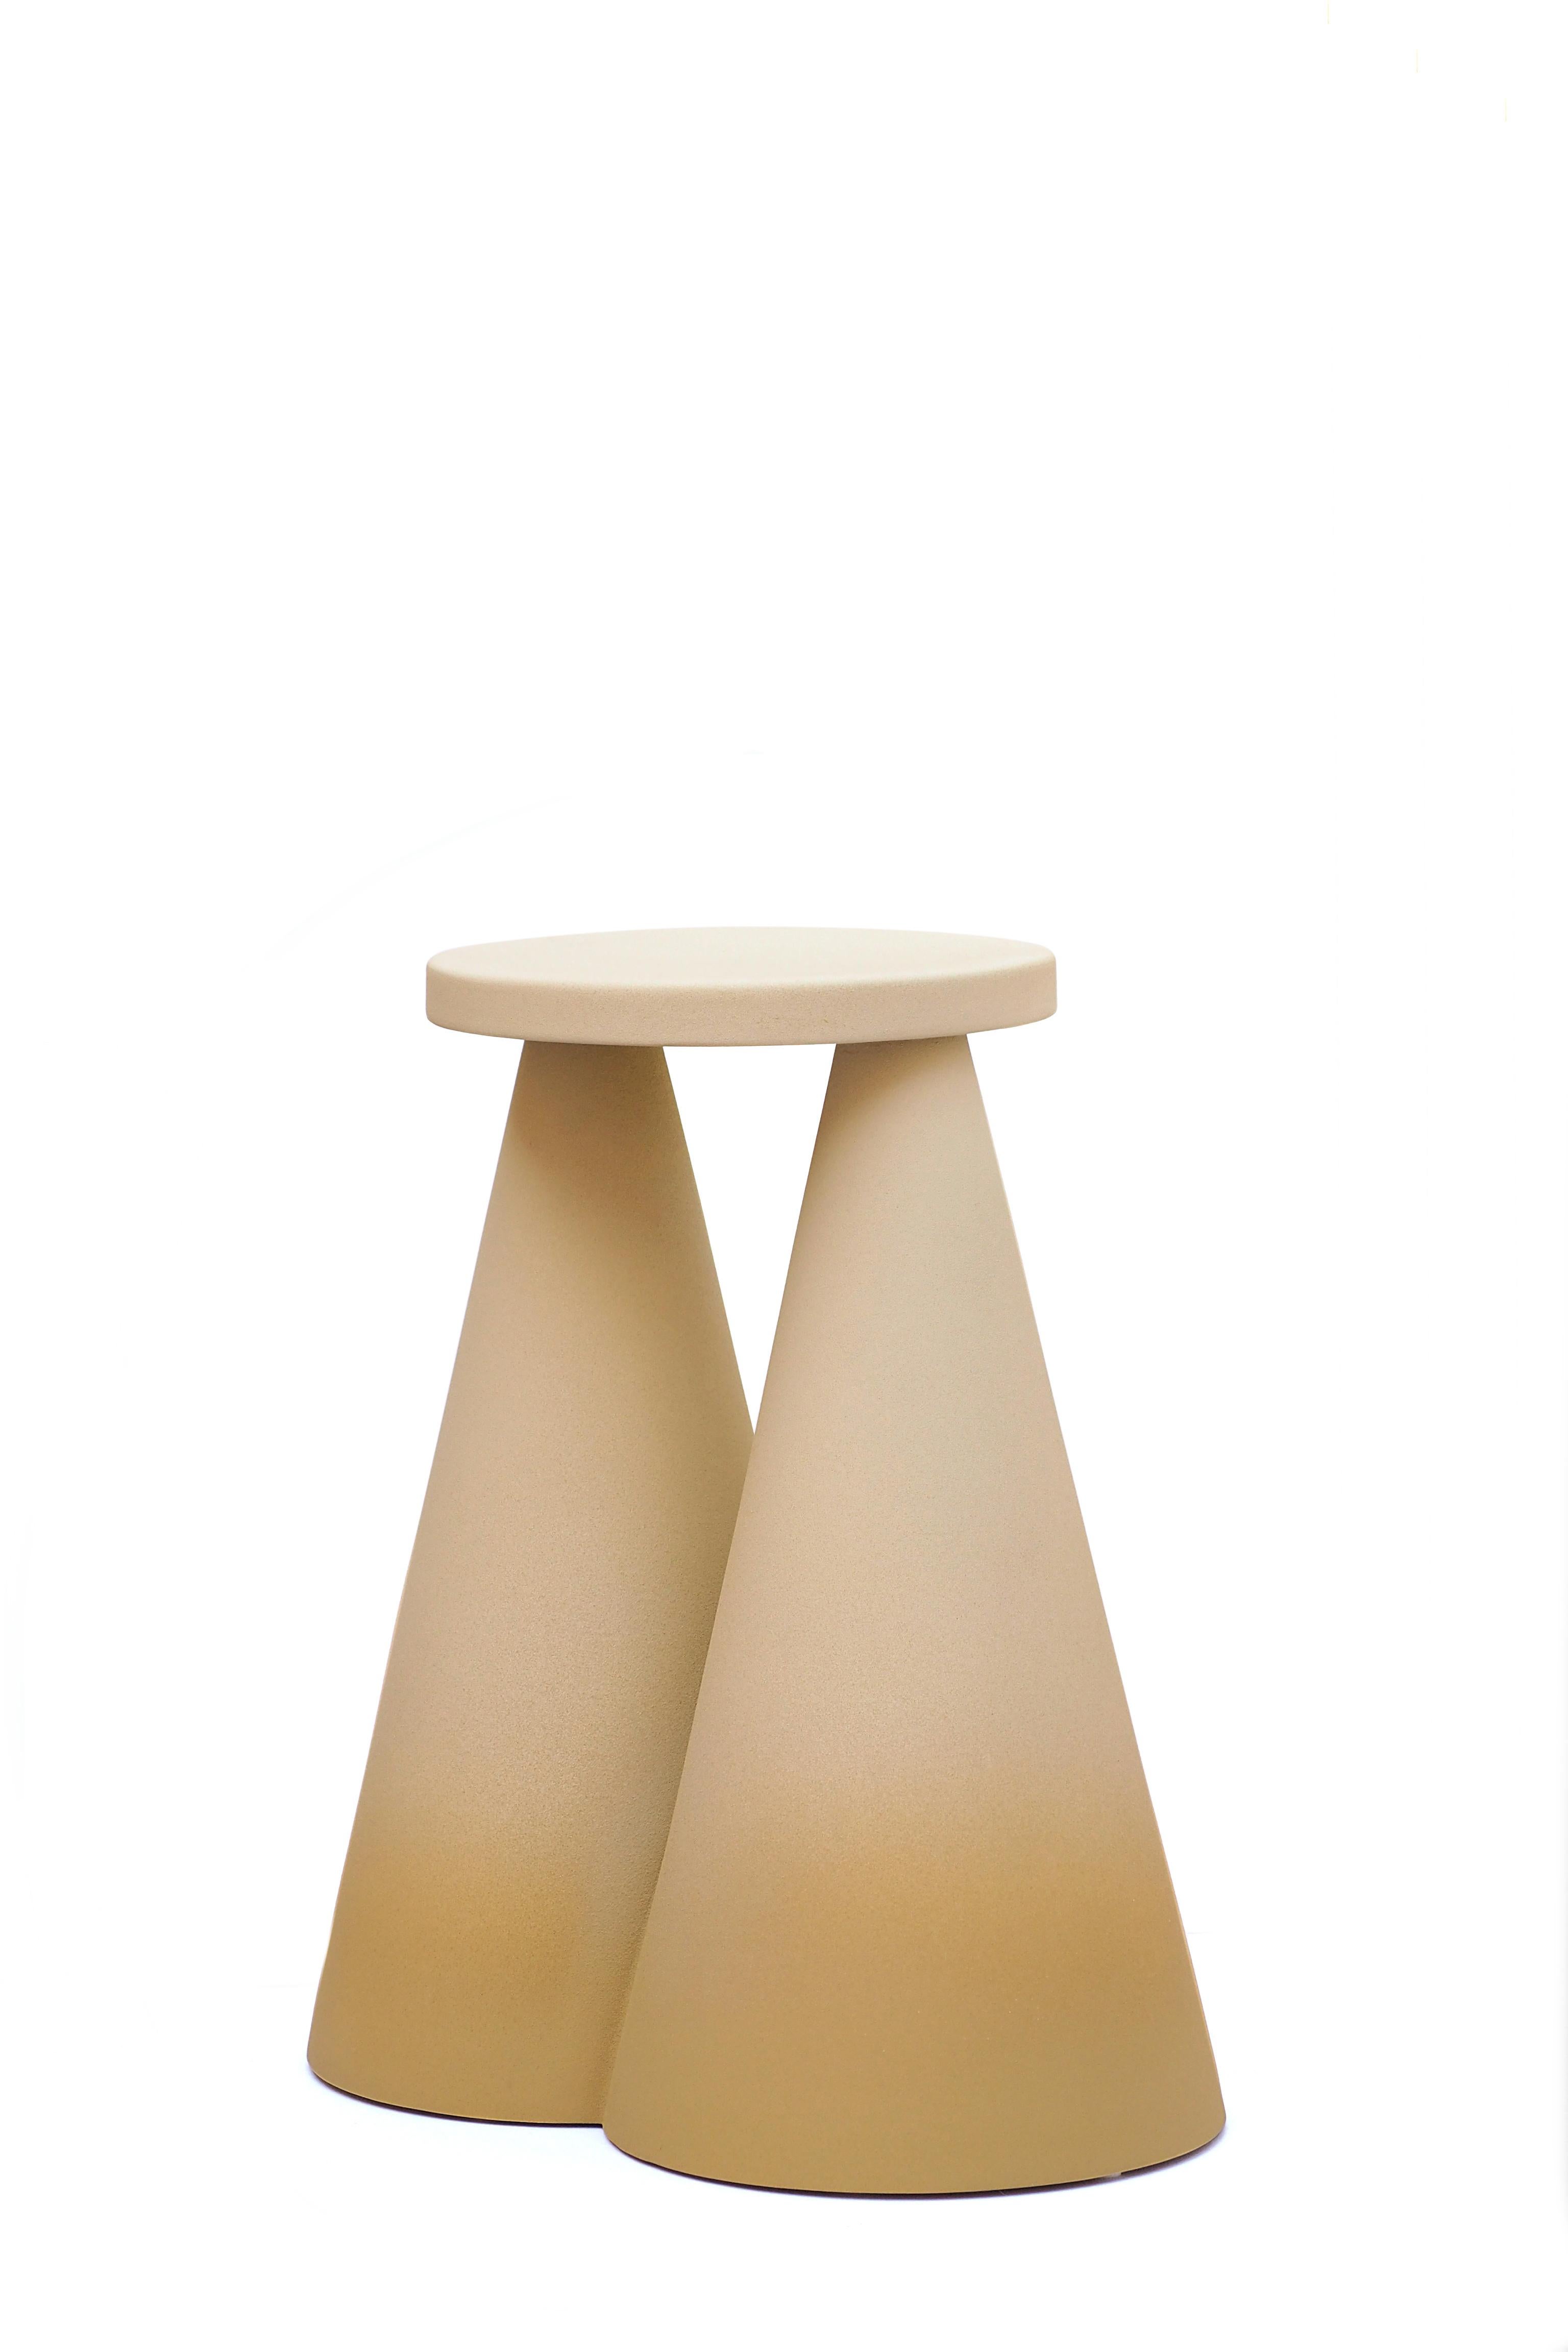 Isola side table by Cara Davide
Dimensions: 25 x 43 x H45 
Materials: Ceramic /Rough touch finishing

Isola side table is completelly made in ceramic using high temperature
furnace, to make the material stronger.
The large base make the object